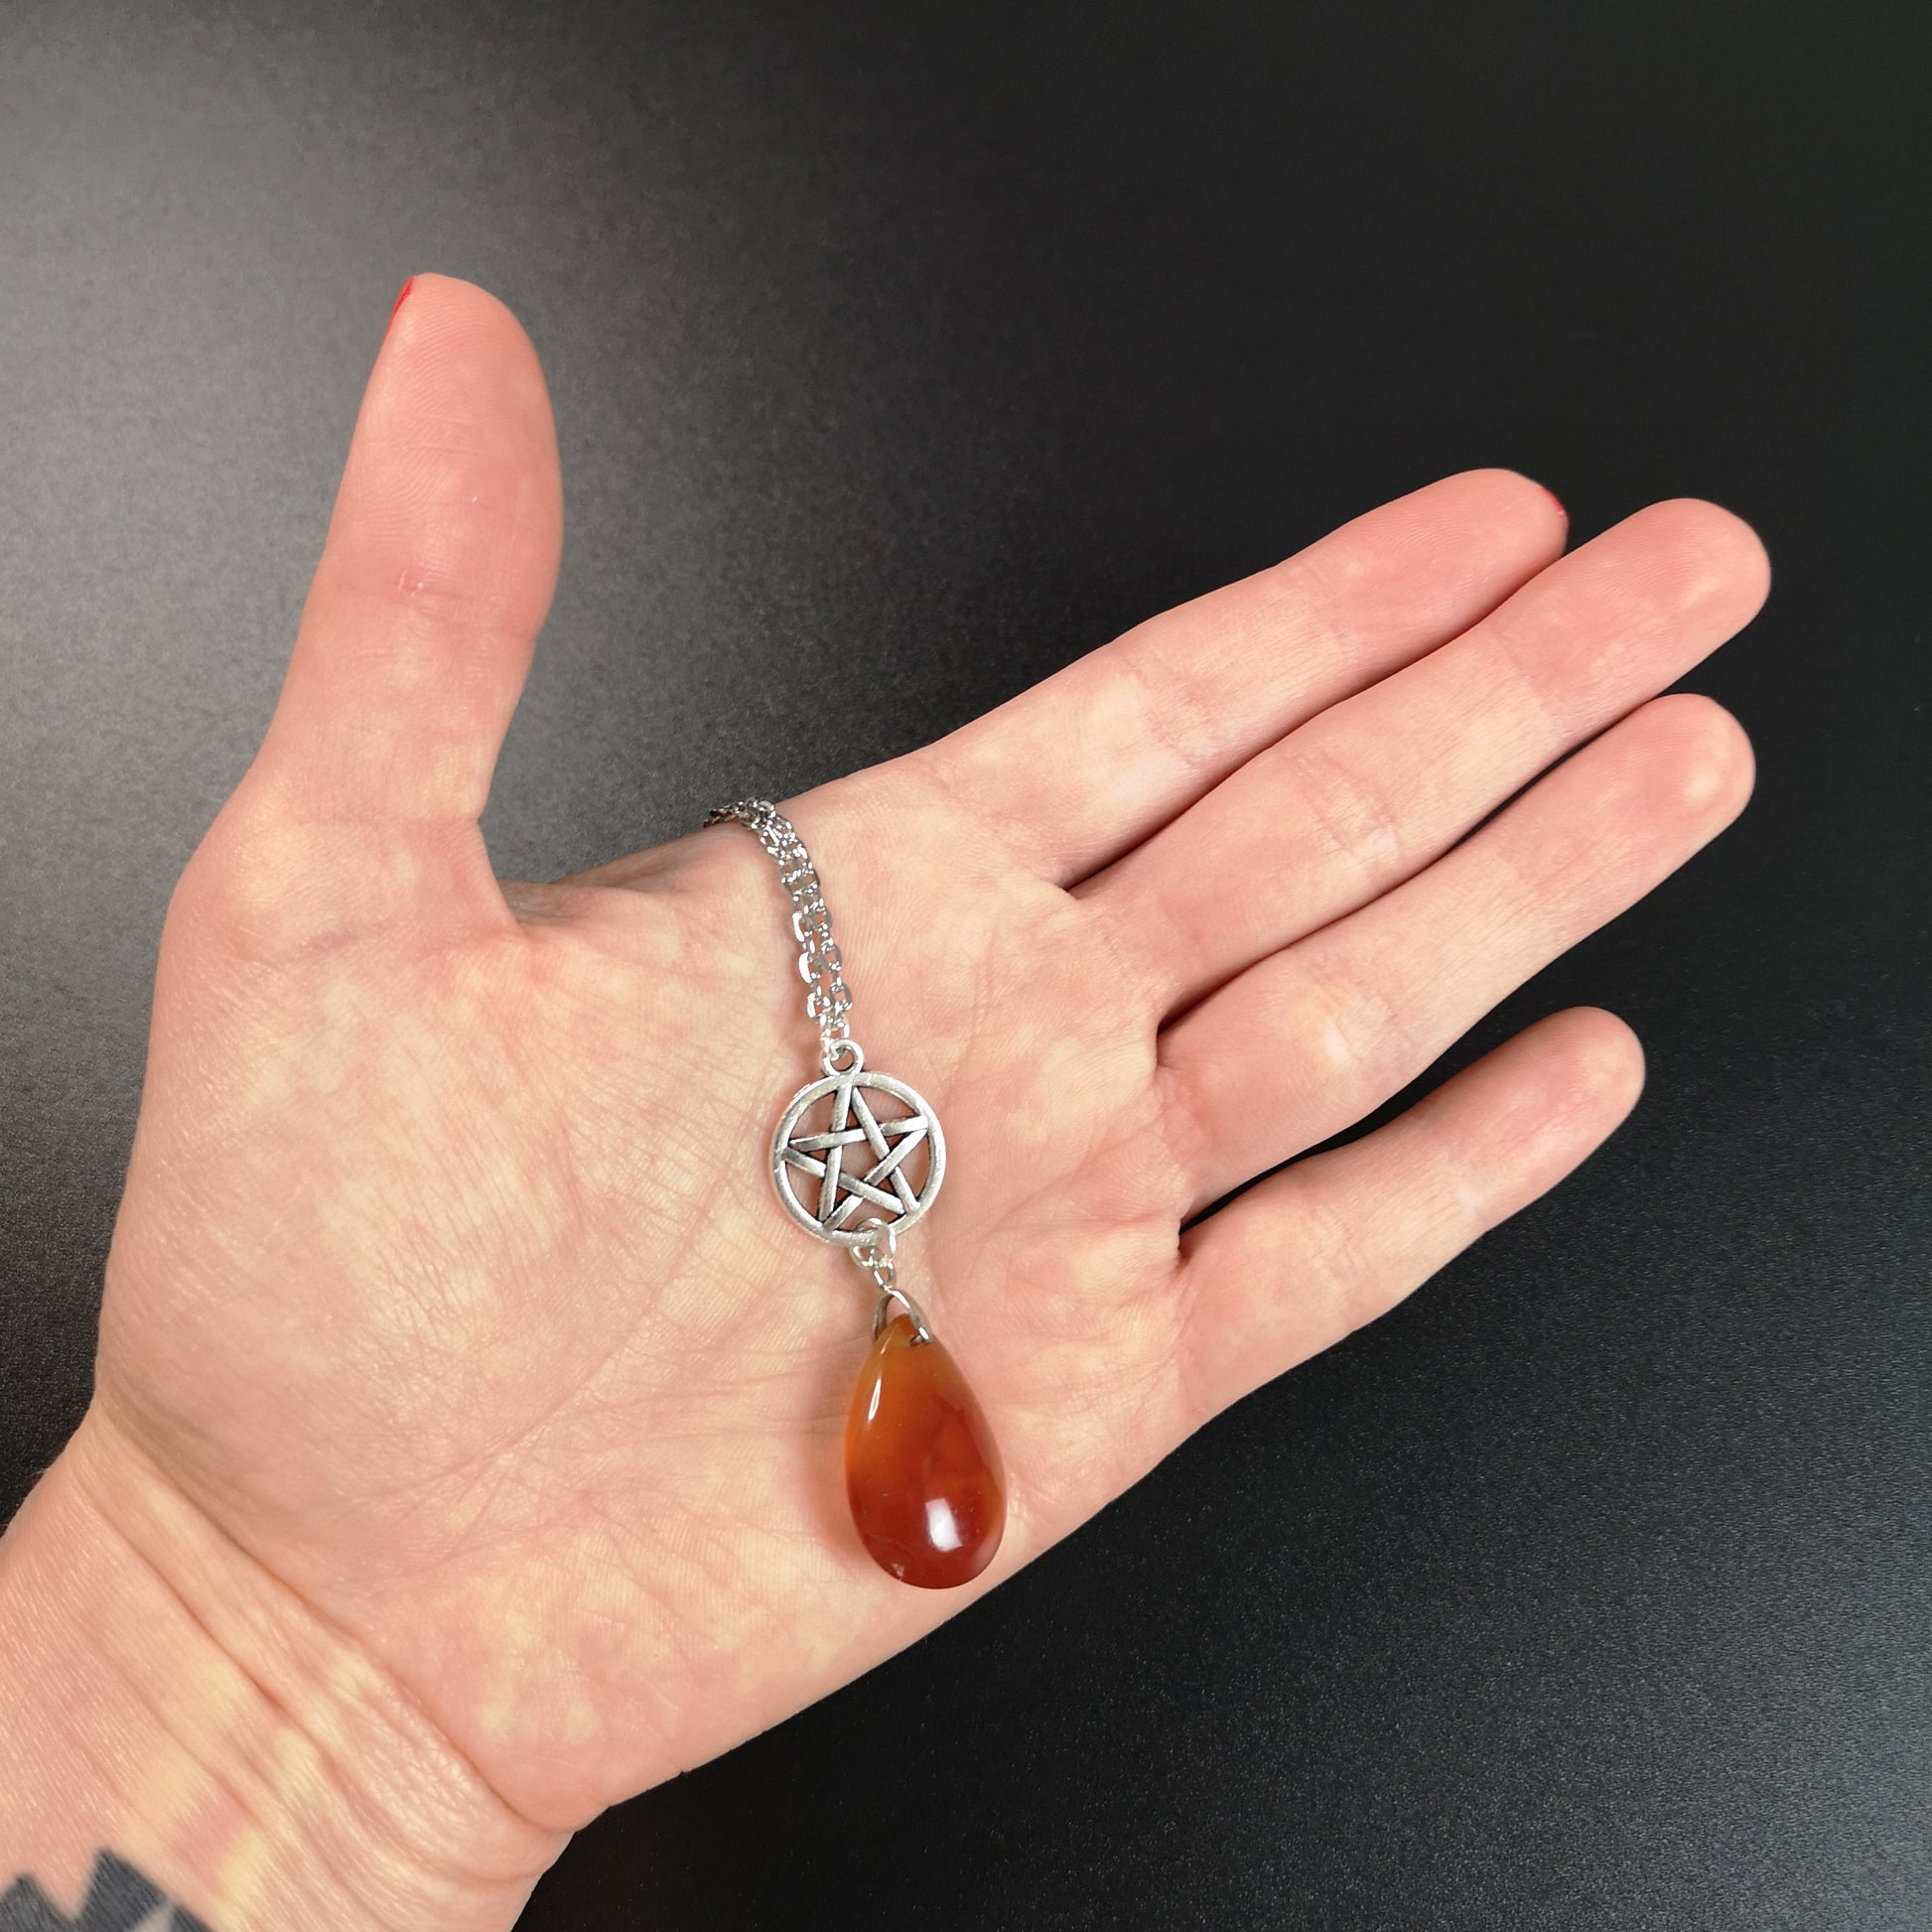 Carnelian and pentacle witchy choker necklace - The French Witch shop